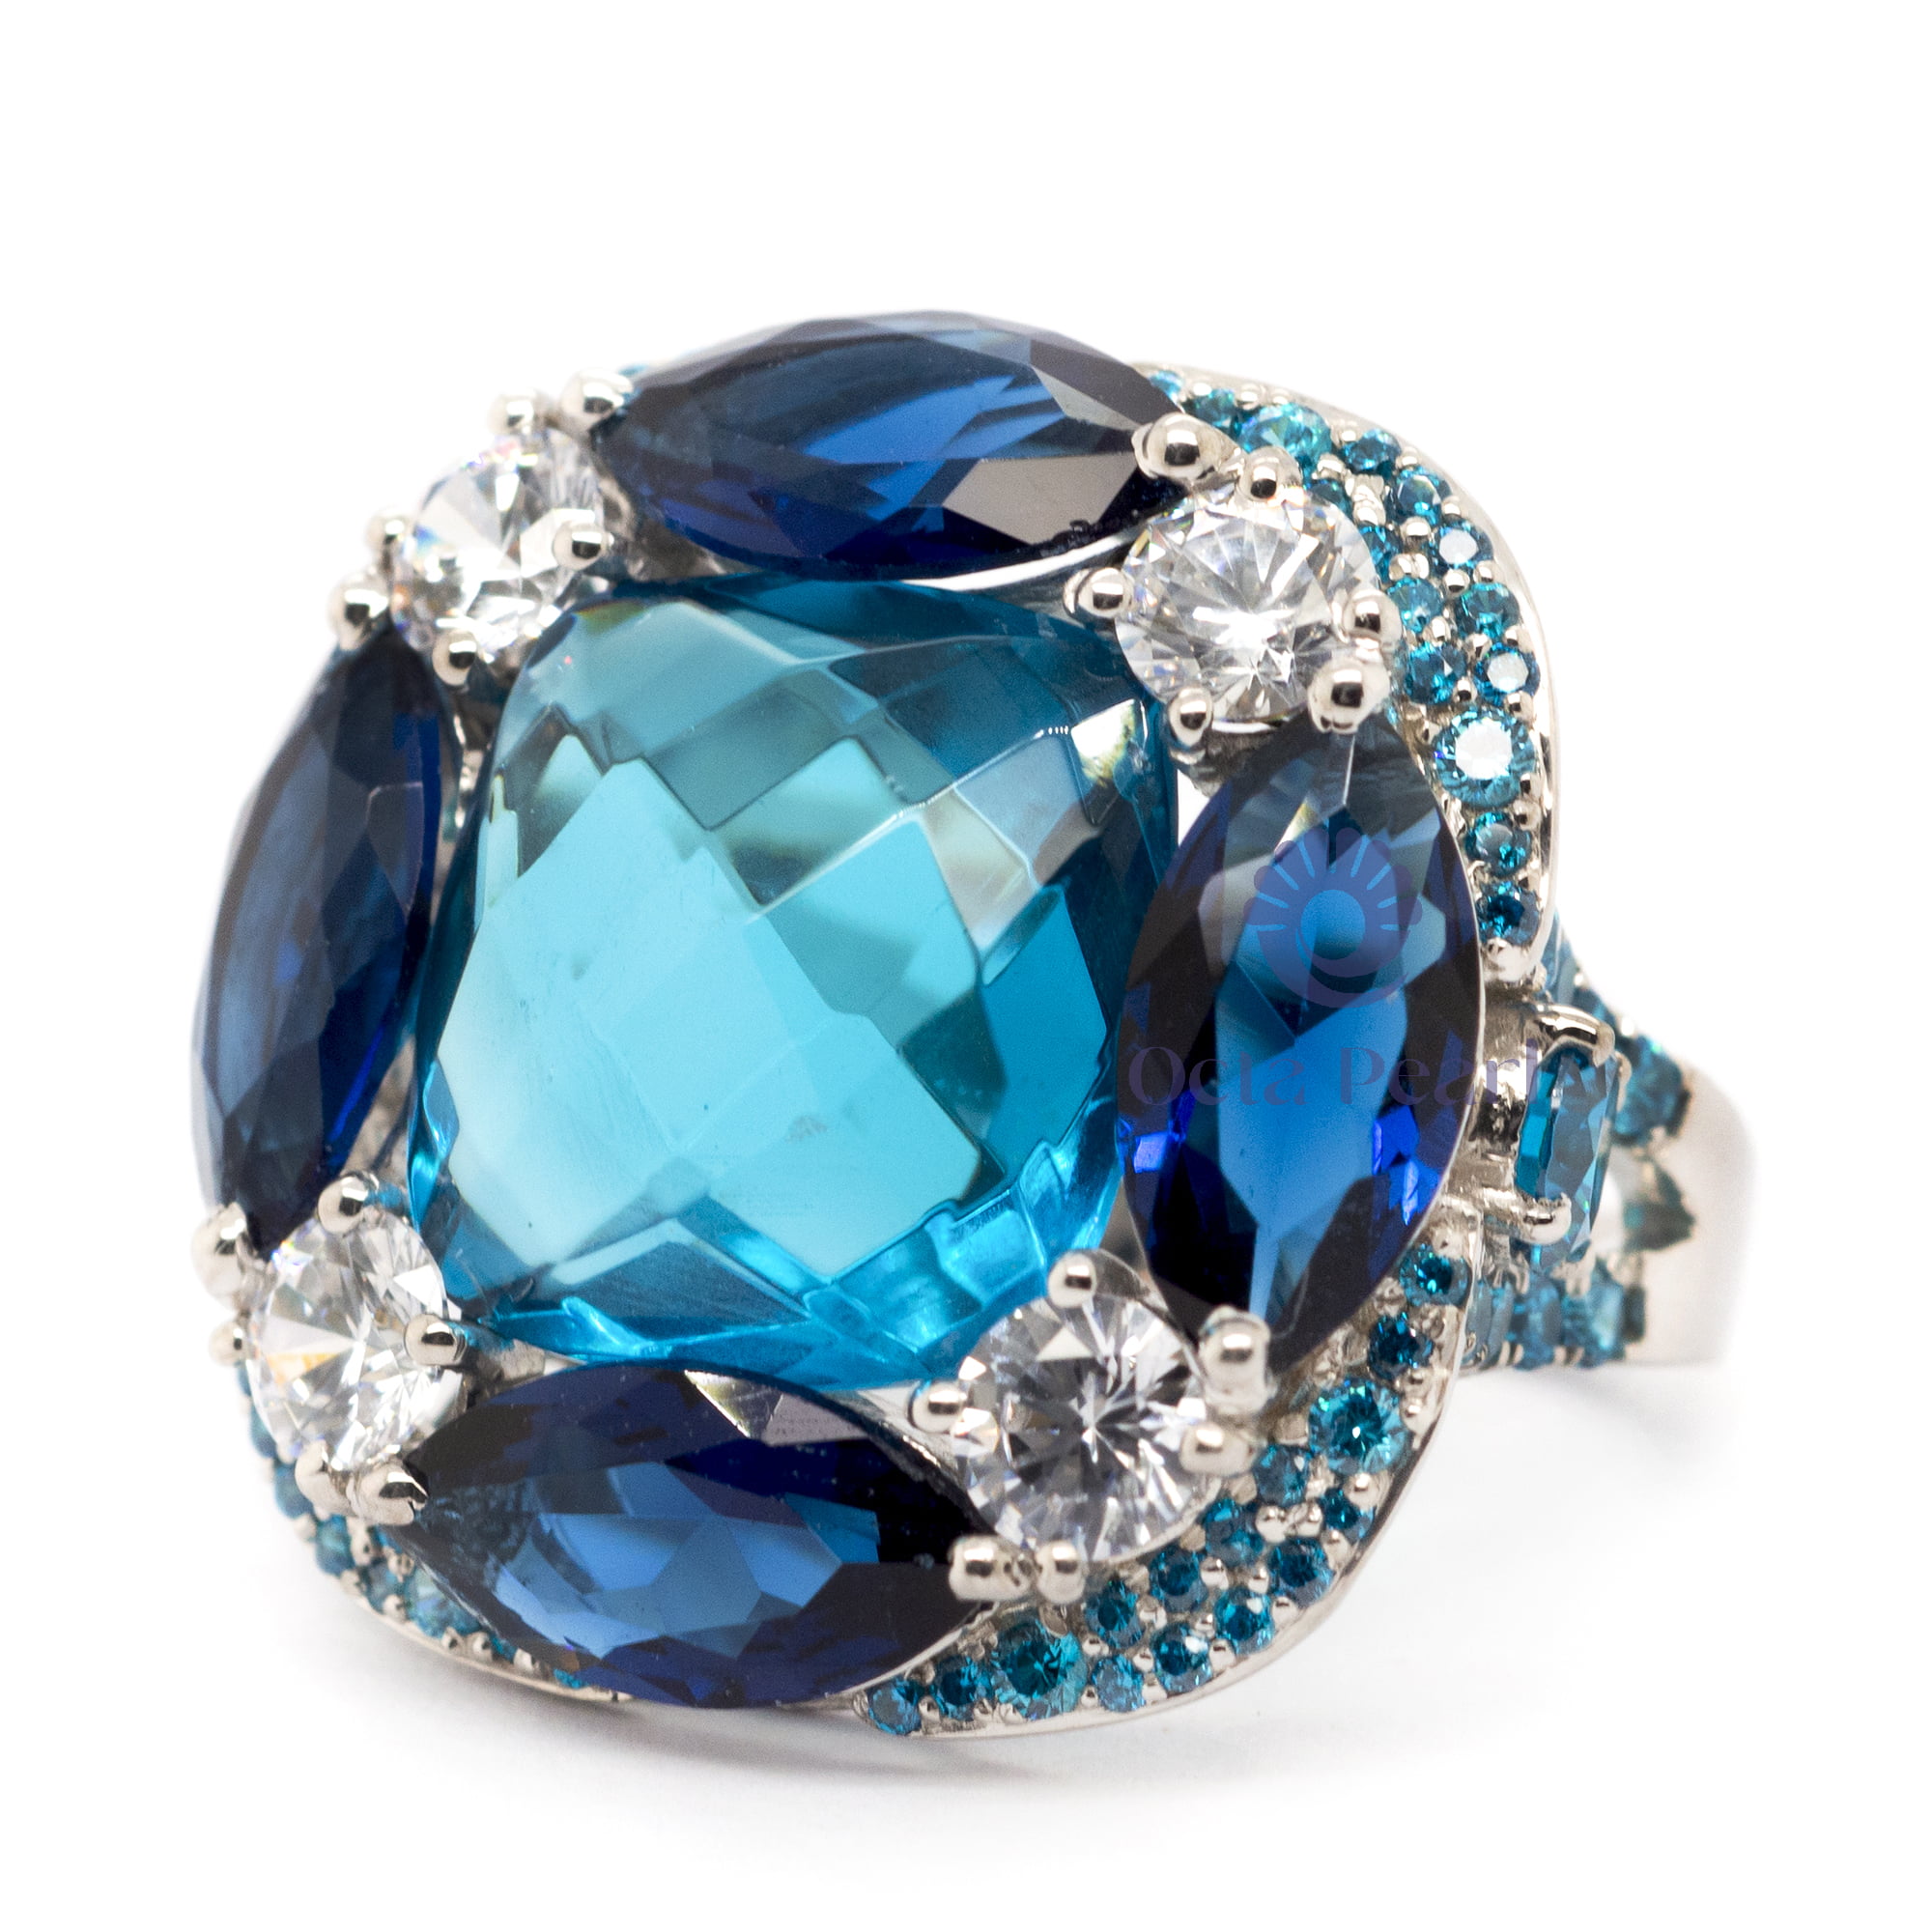 Aqua Cushion & Round With Blue Sapphire Marquise CZ Stone Cocktail Ring (21 8/9 TCW)